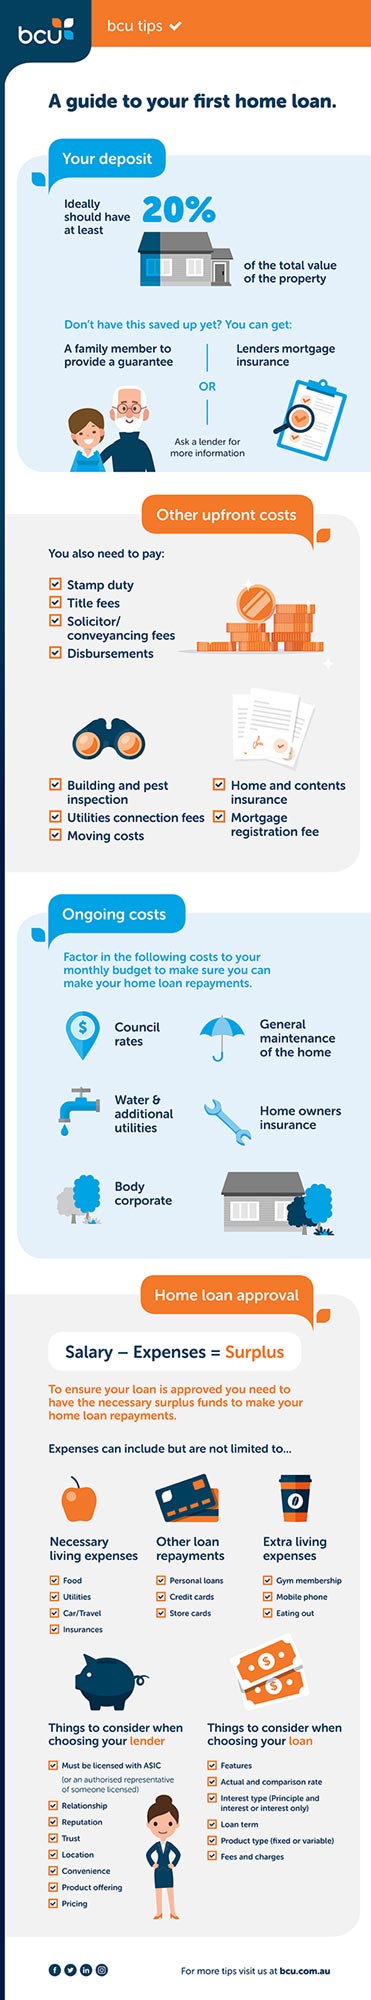 Infographic showing a guide to your first home loan